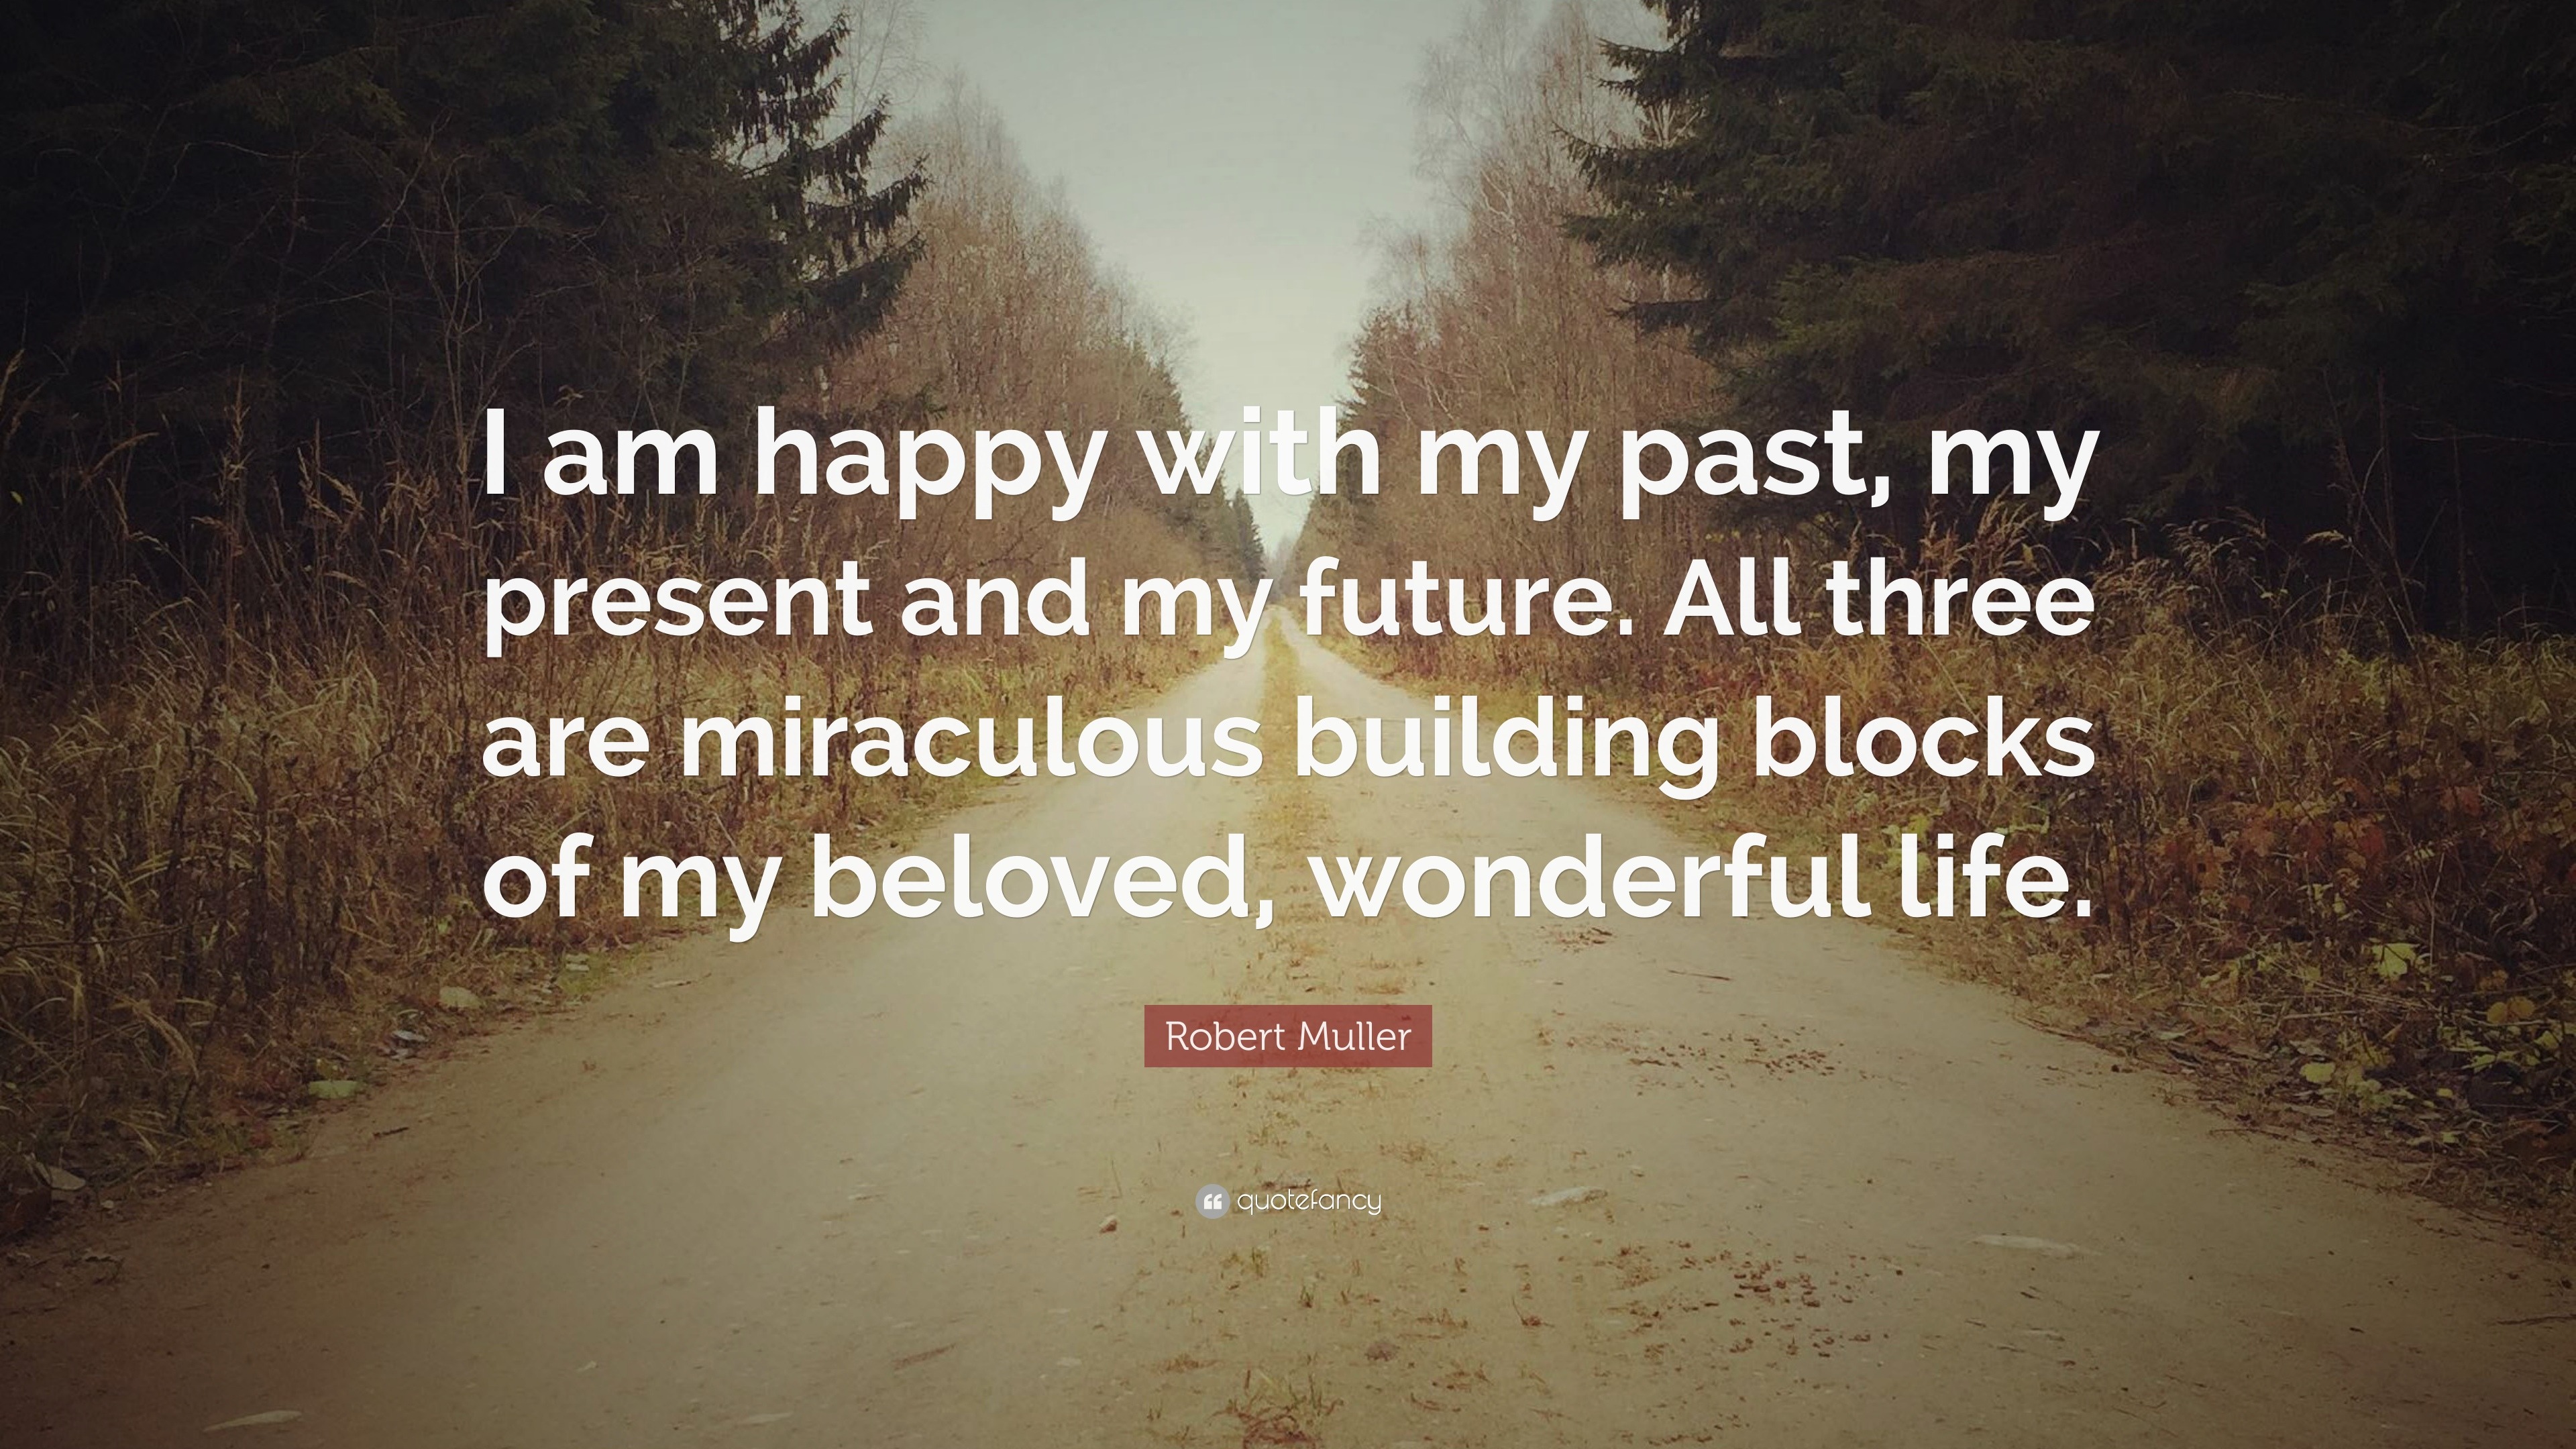 Robert Muller Quote I Am Happy With My Past My Present And My Future All Three Are Miraculous Building Blocks Of My Beloved Wonderful Lif